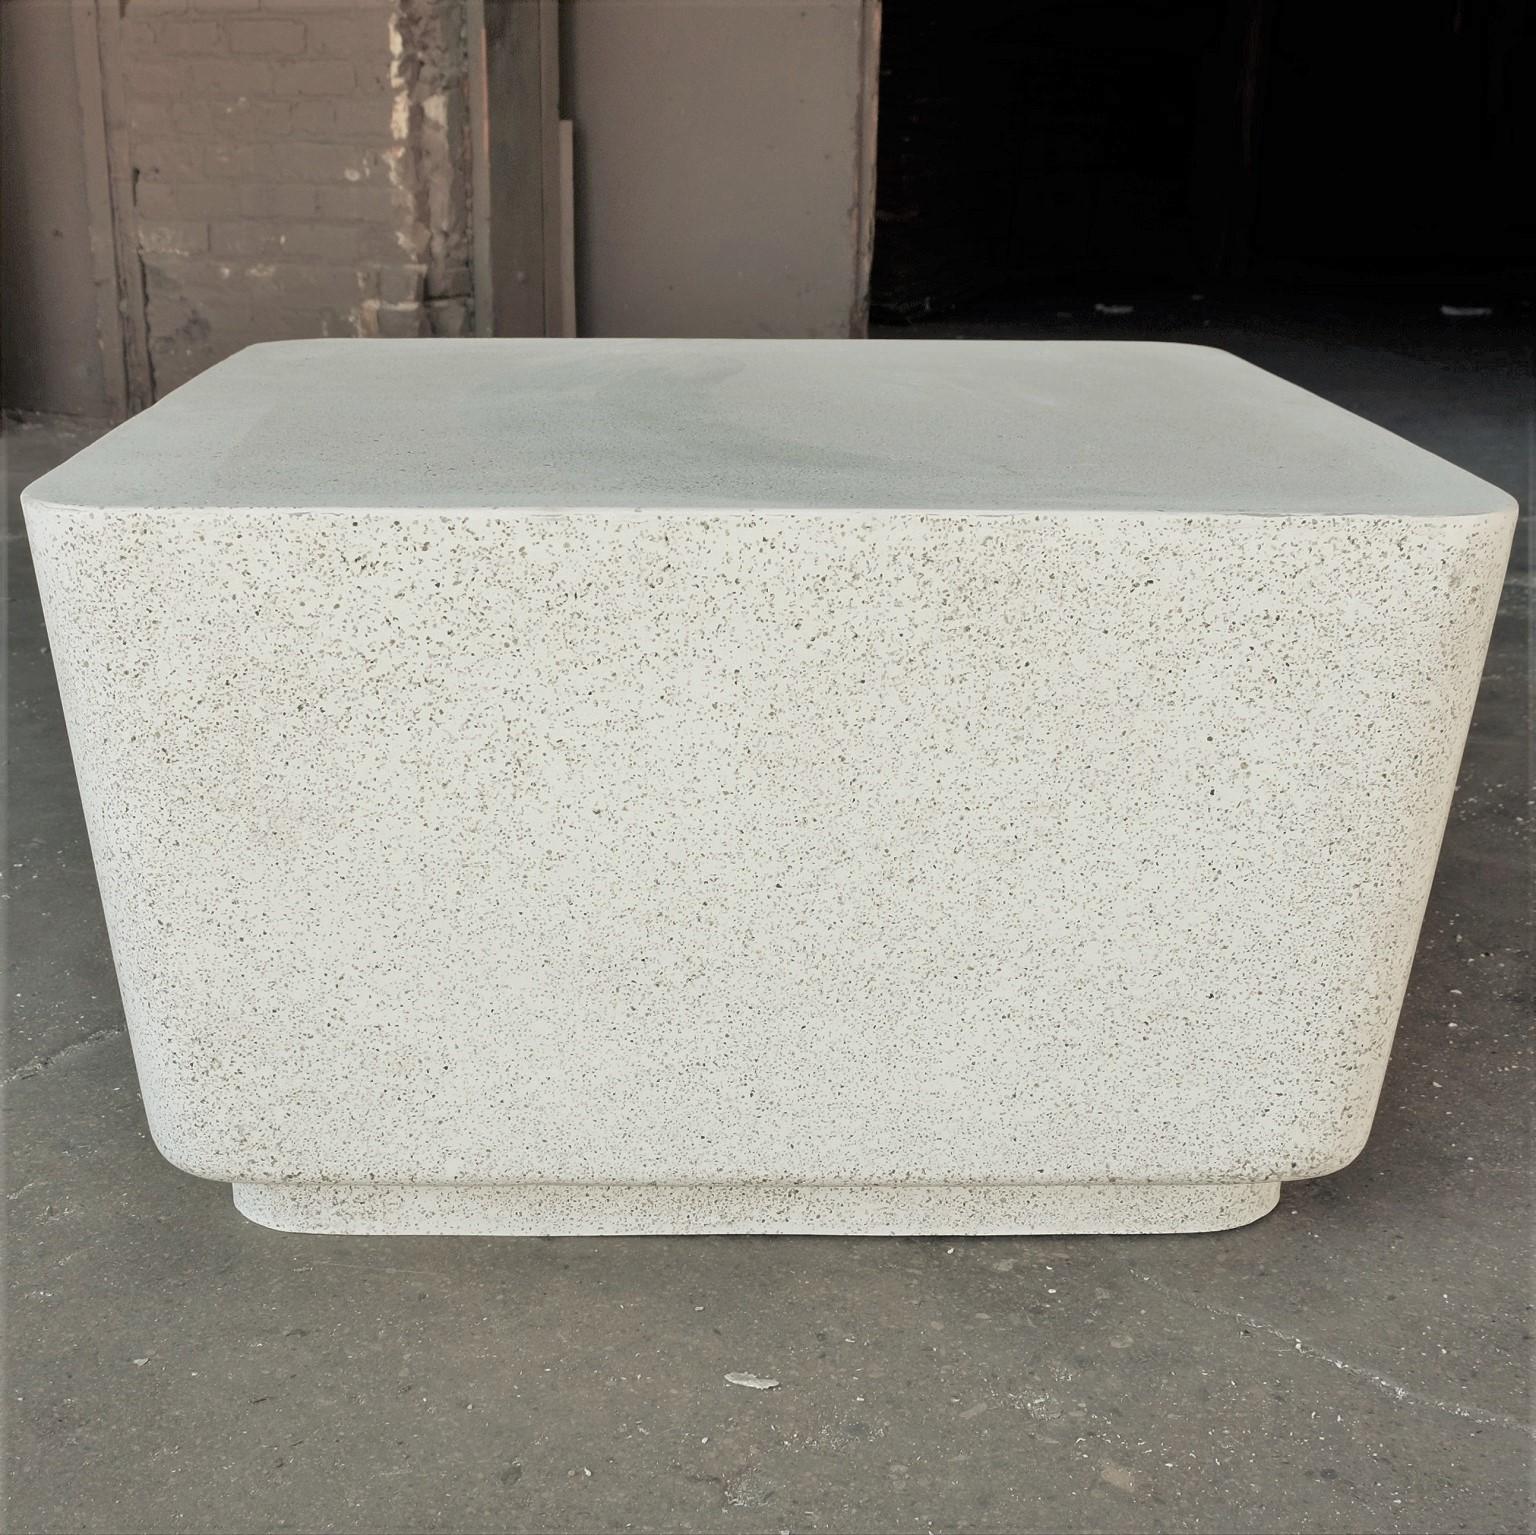 Rounded edges form a continuous plane, juxtaposing rigid structural expectation with an infinite expanse. A reliable, welcoming presence.

Dimensions: Width 32 in. (81.3 cm), depth 32 in. (81.3 cm), height 18 in. (45.7 cm). Weight 45 lbs. (20.4